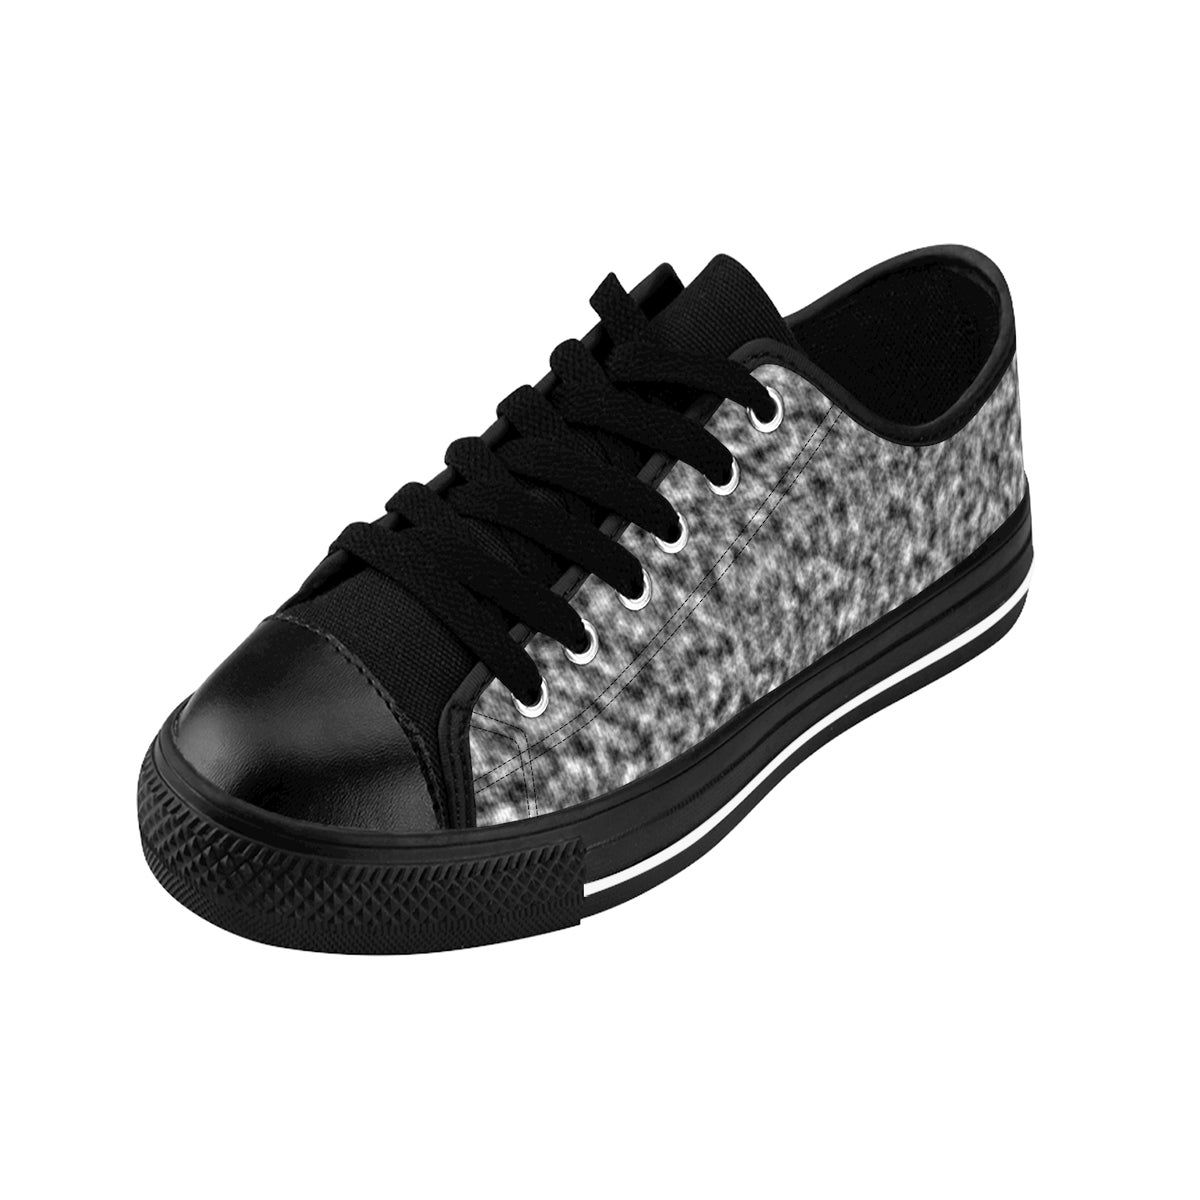 White and Black Clouds Women's Sneakers